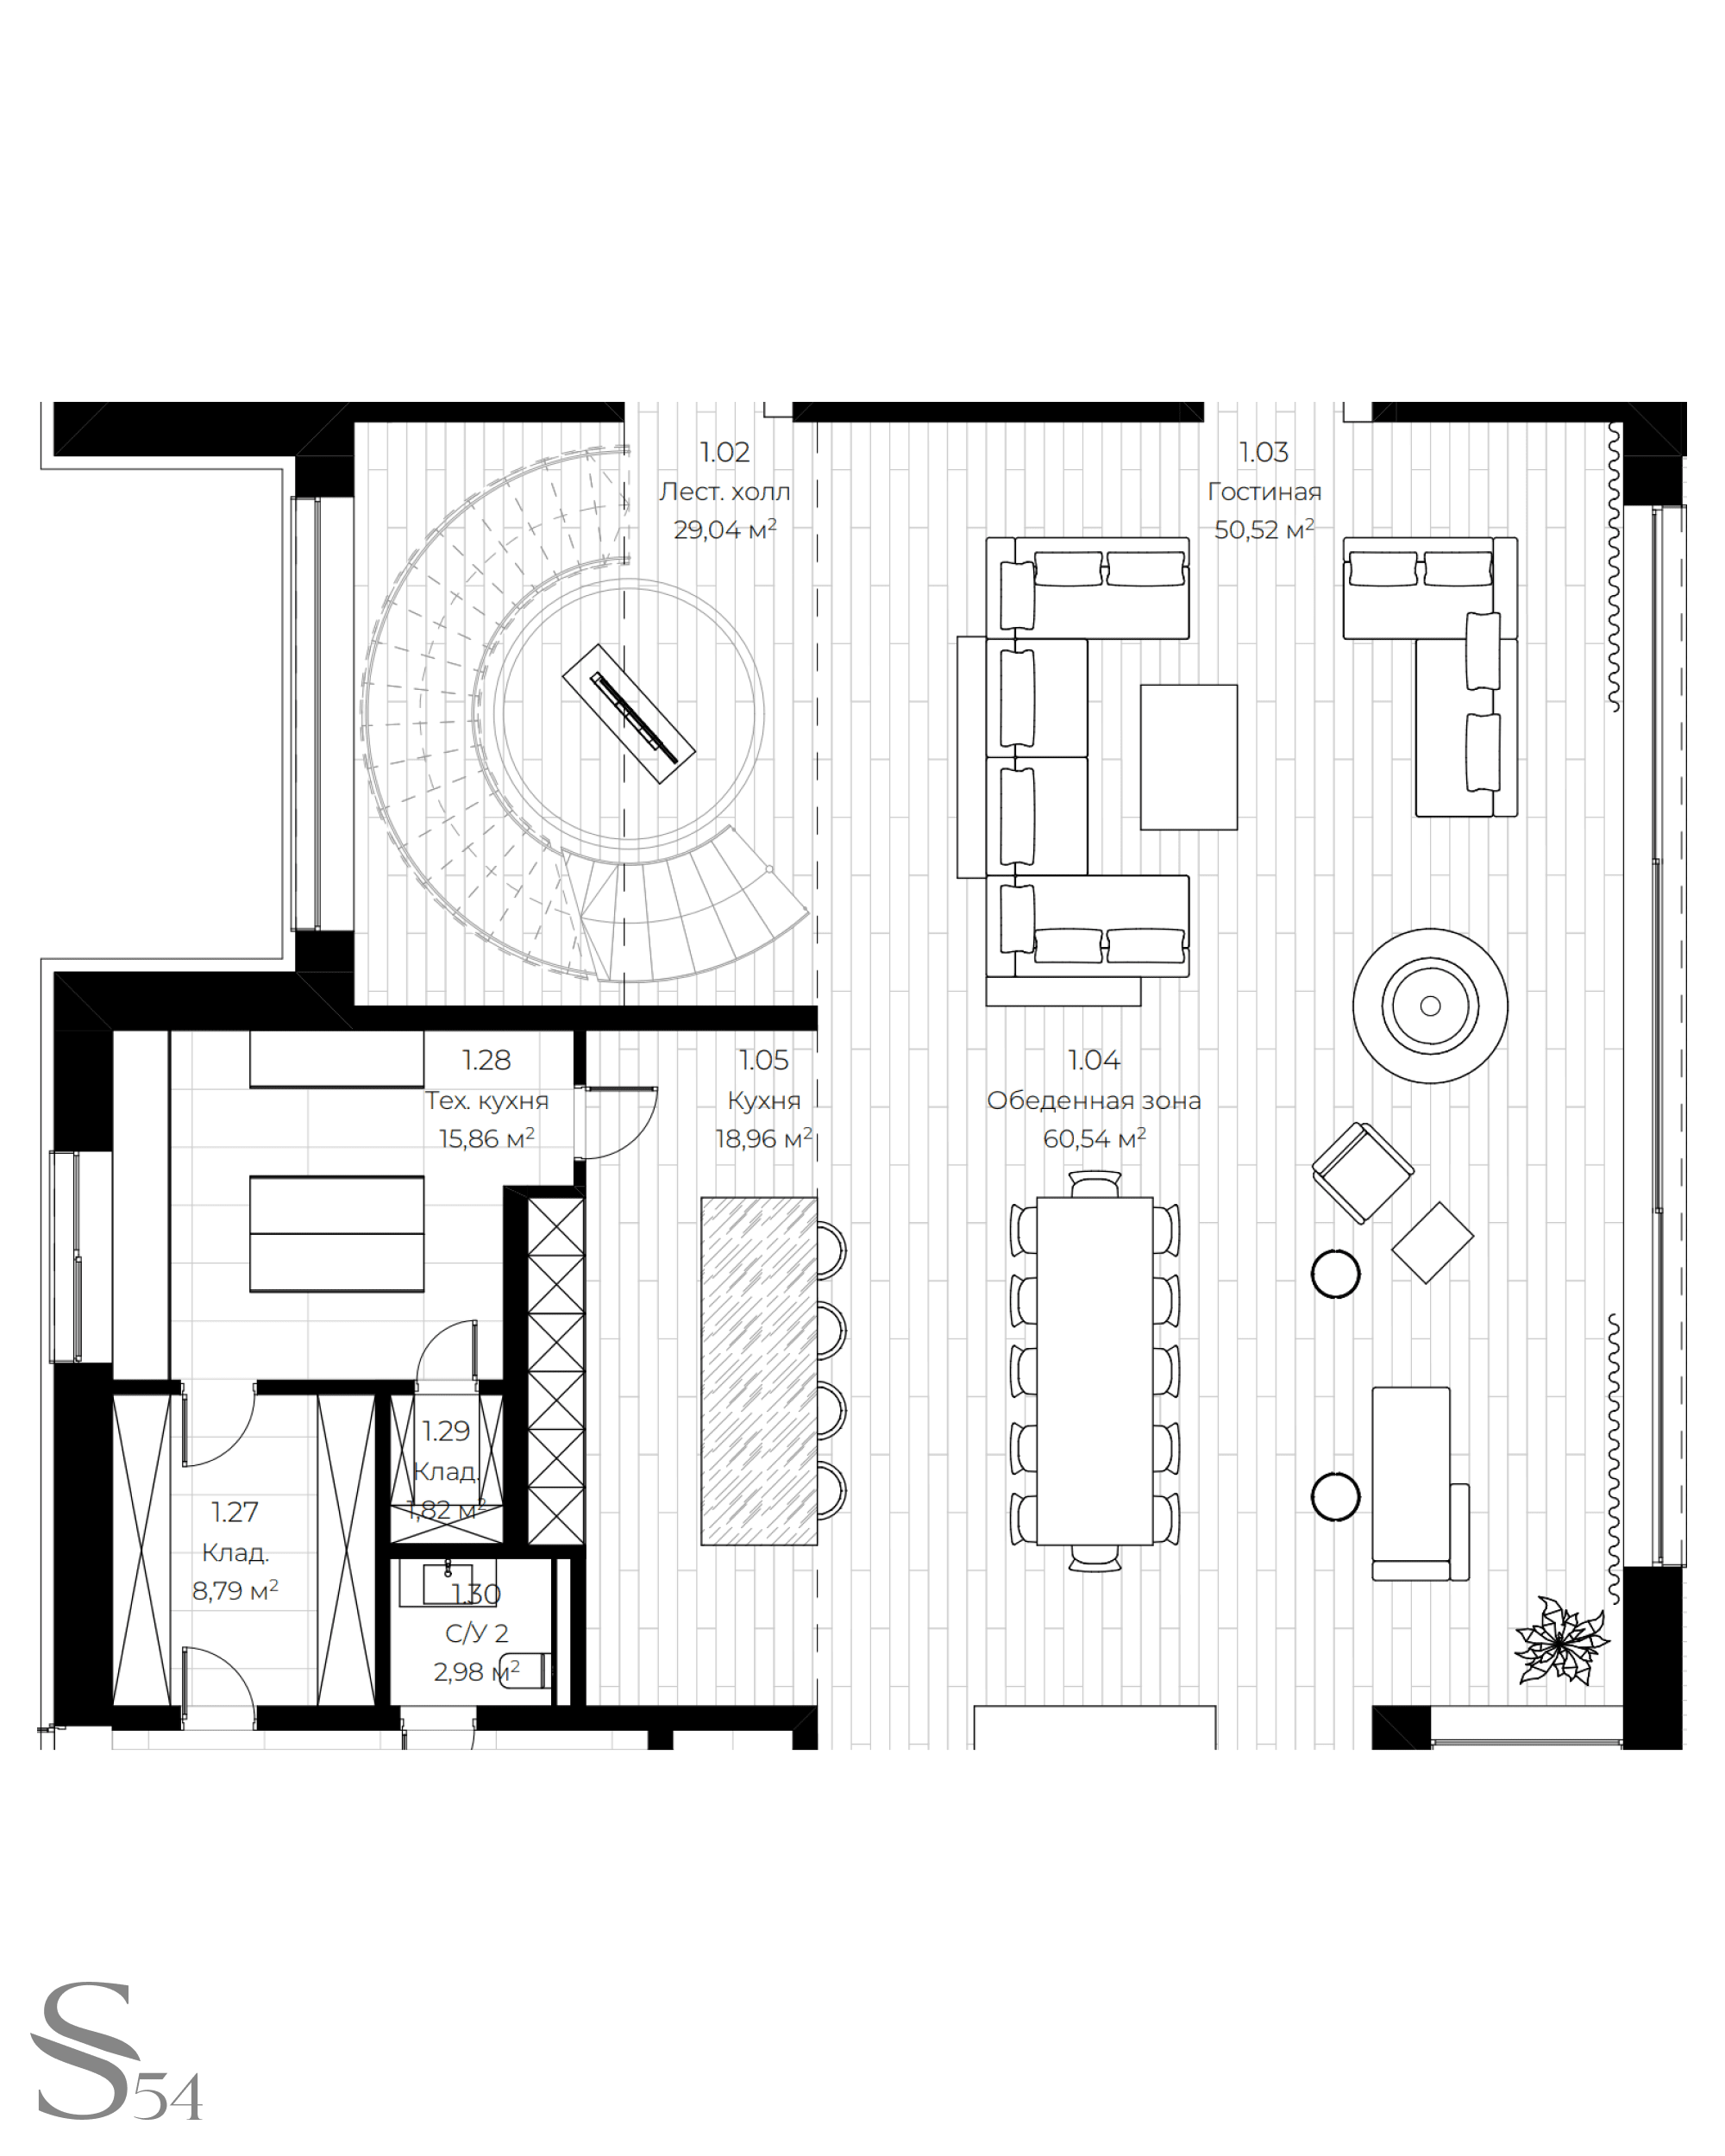 Layout of dining area with technical kitchen 